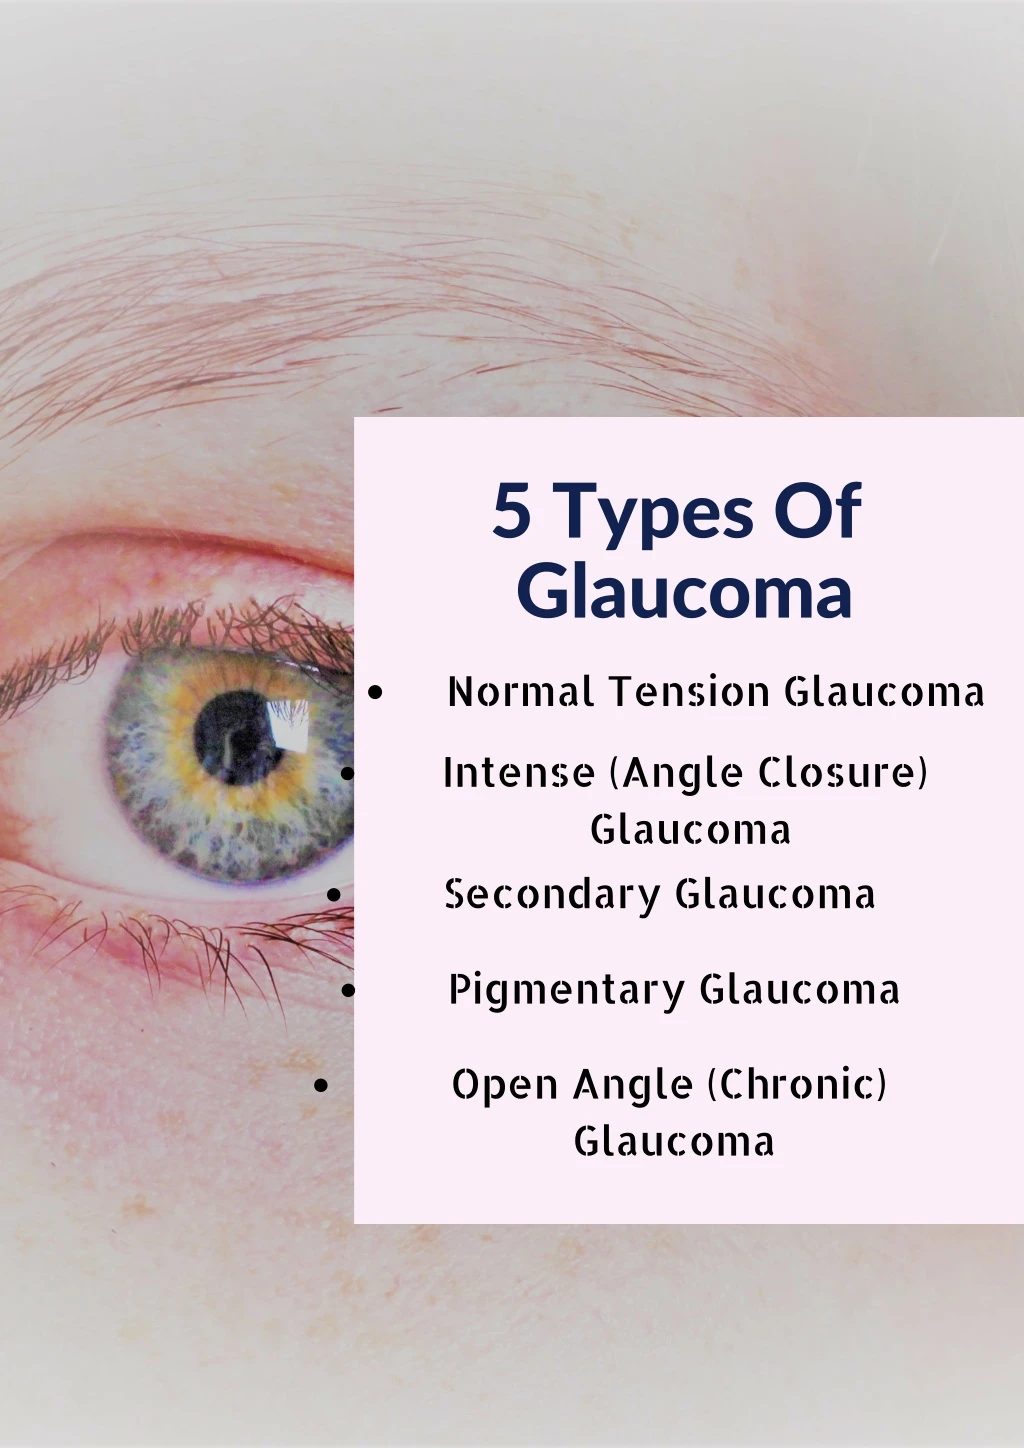 5 types of glaucoma